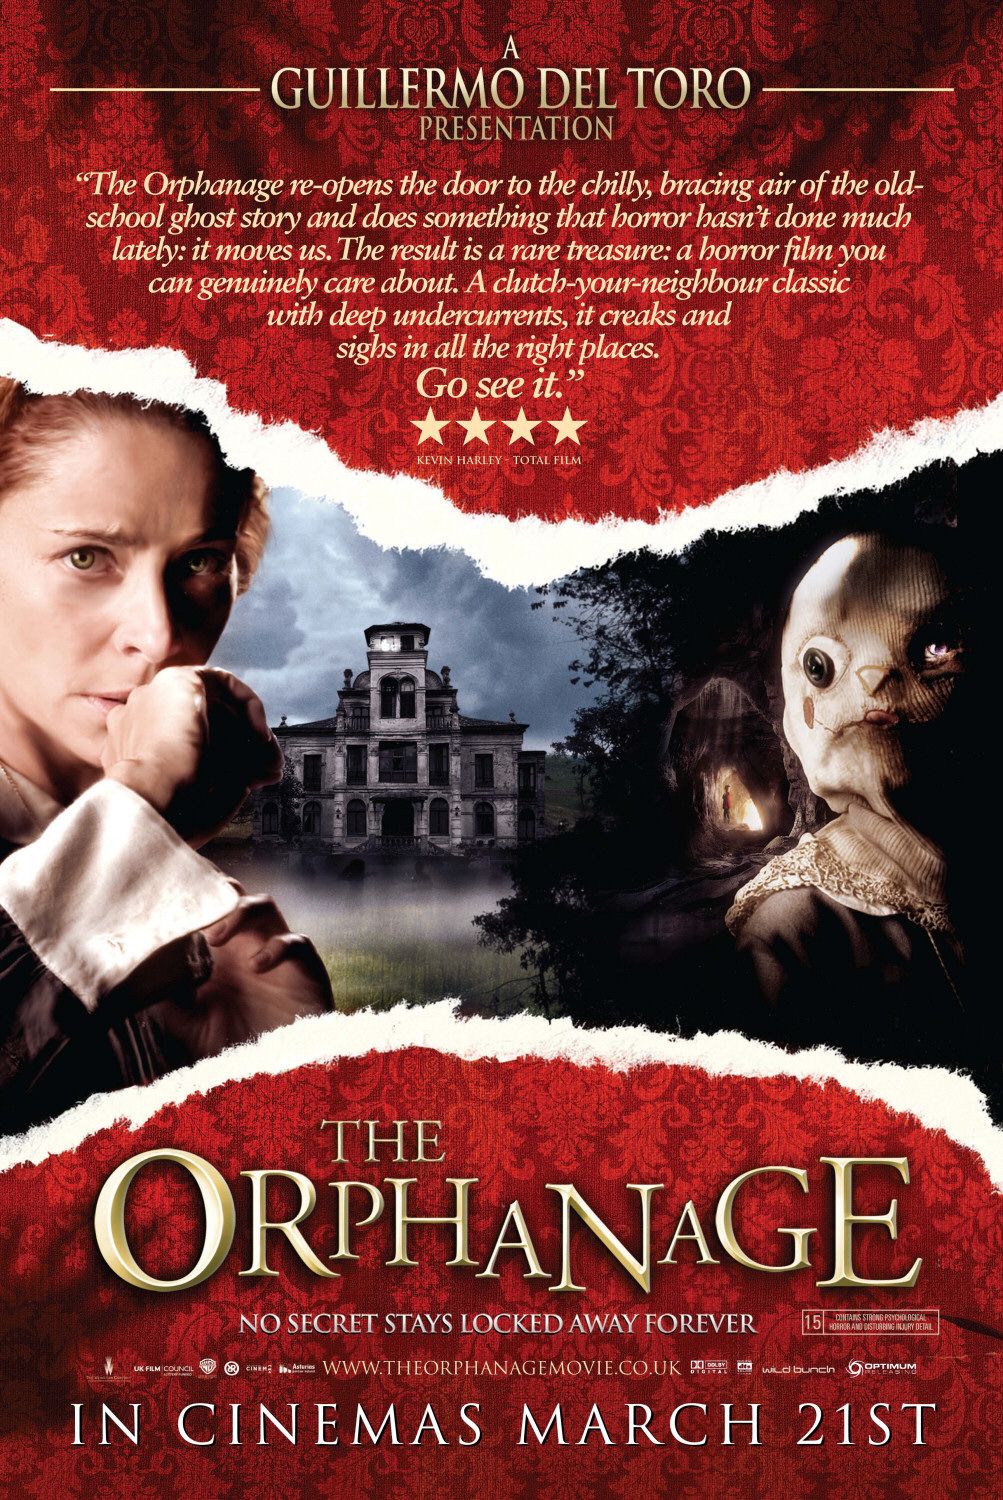 Return to Main Page for Orfanato, El (aka The Orphanage) Posters